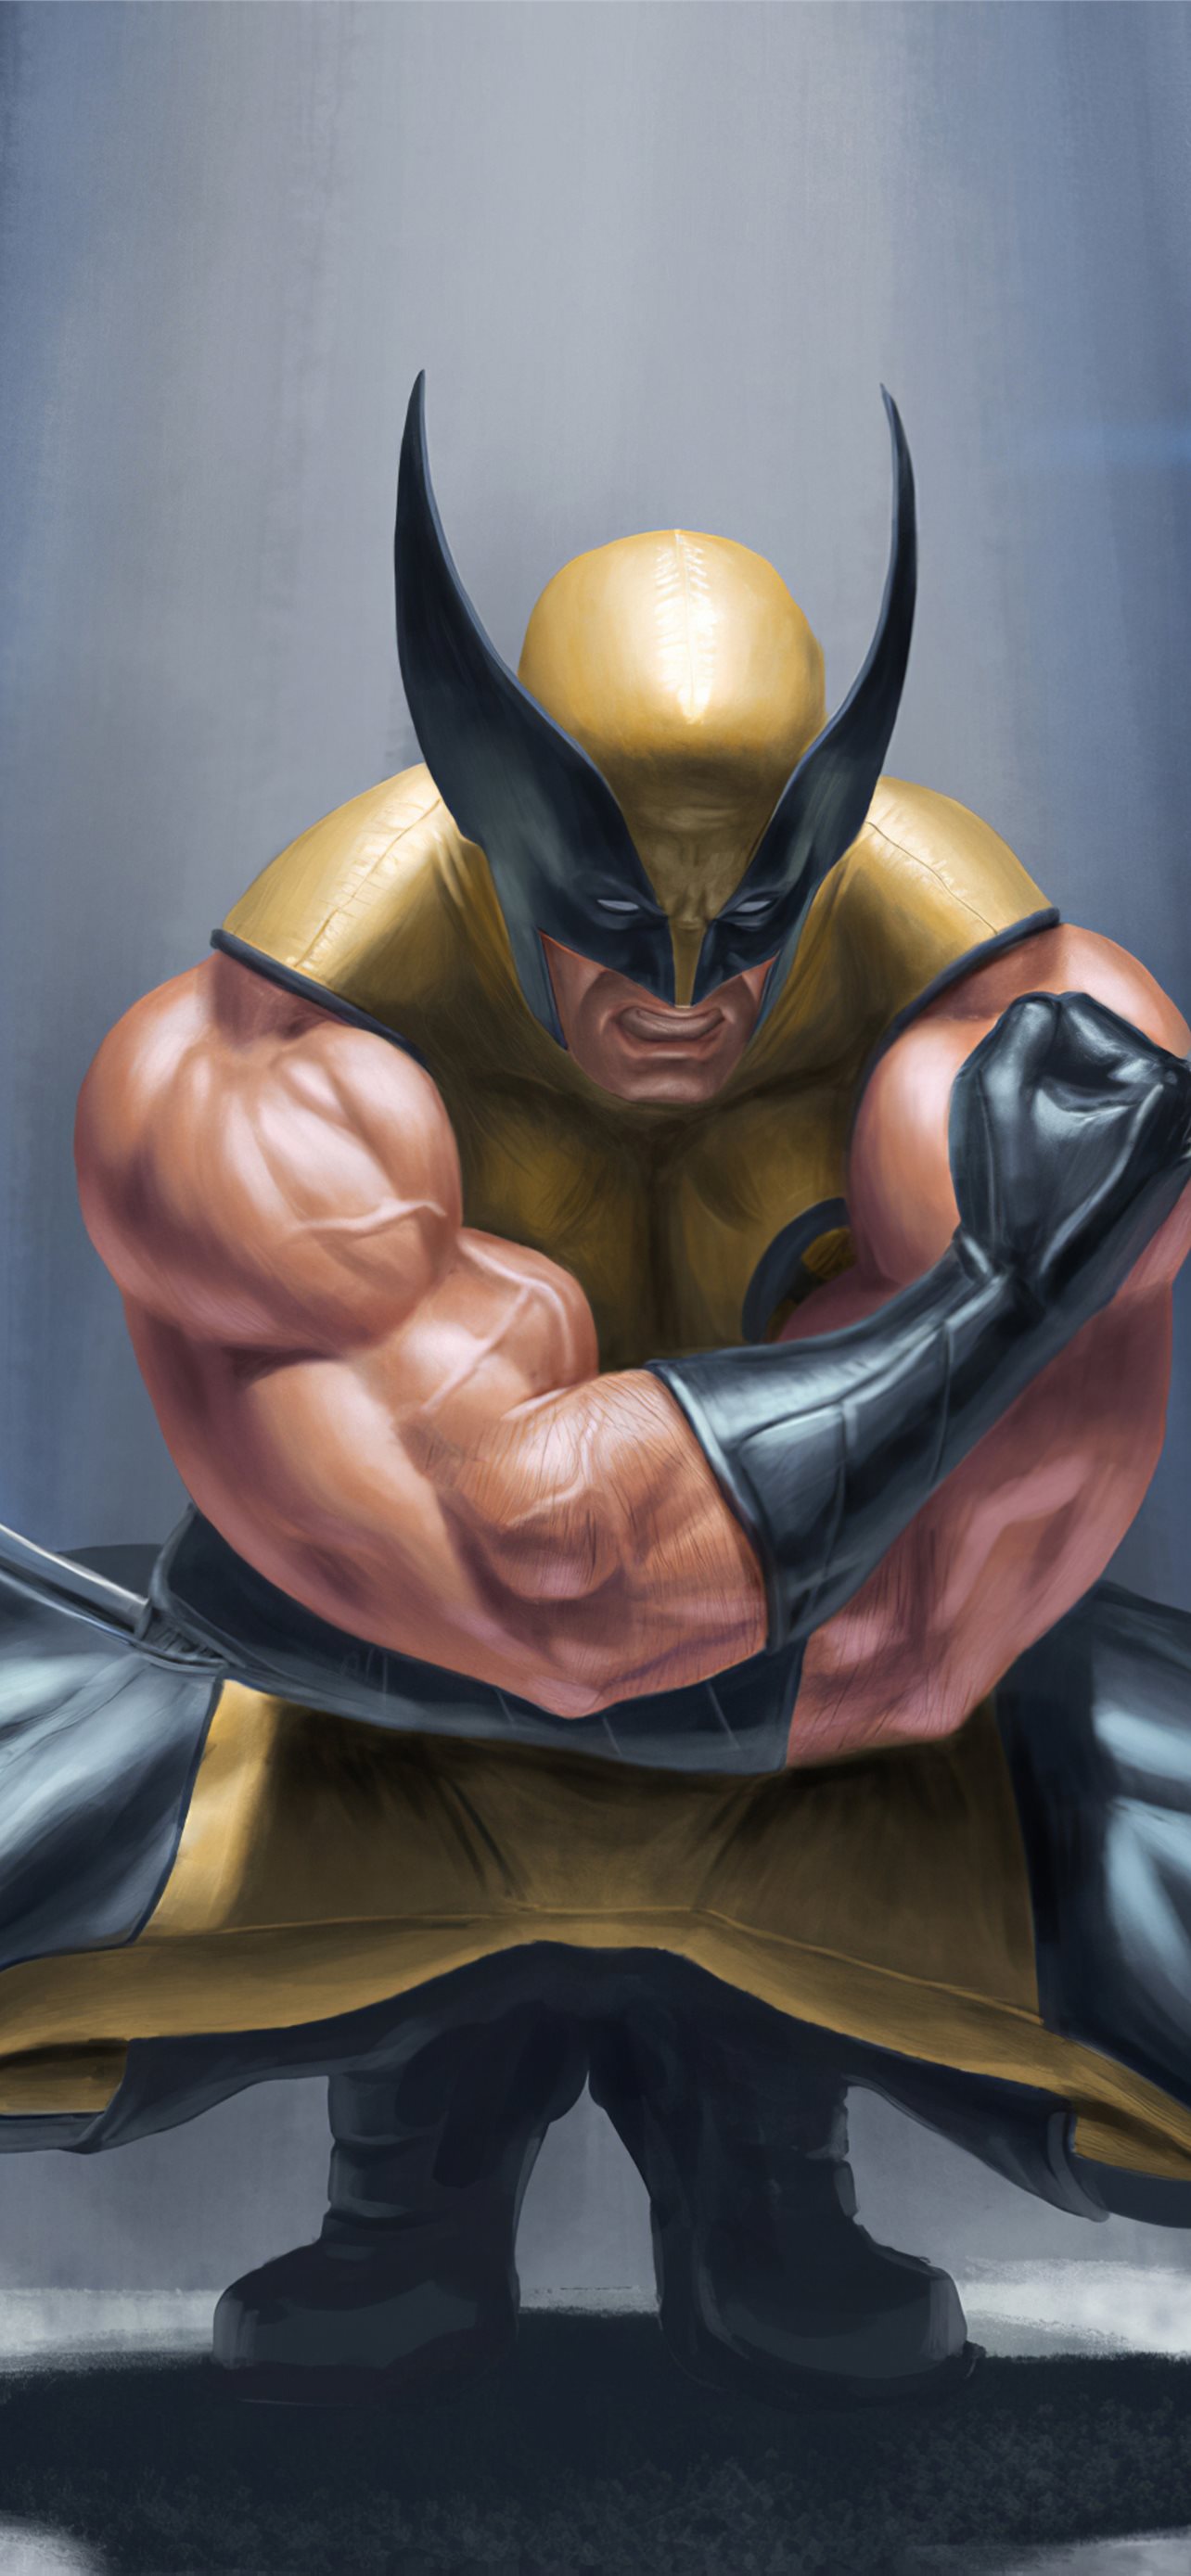 Wolverine 4K Ultra HD Wallpapers, HD Wolverine 3840x2160 Backgrounds, Free  Images Download